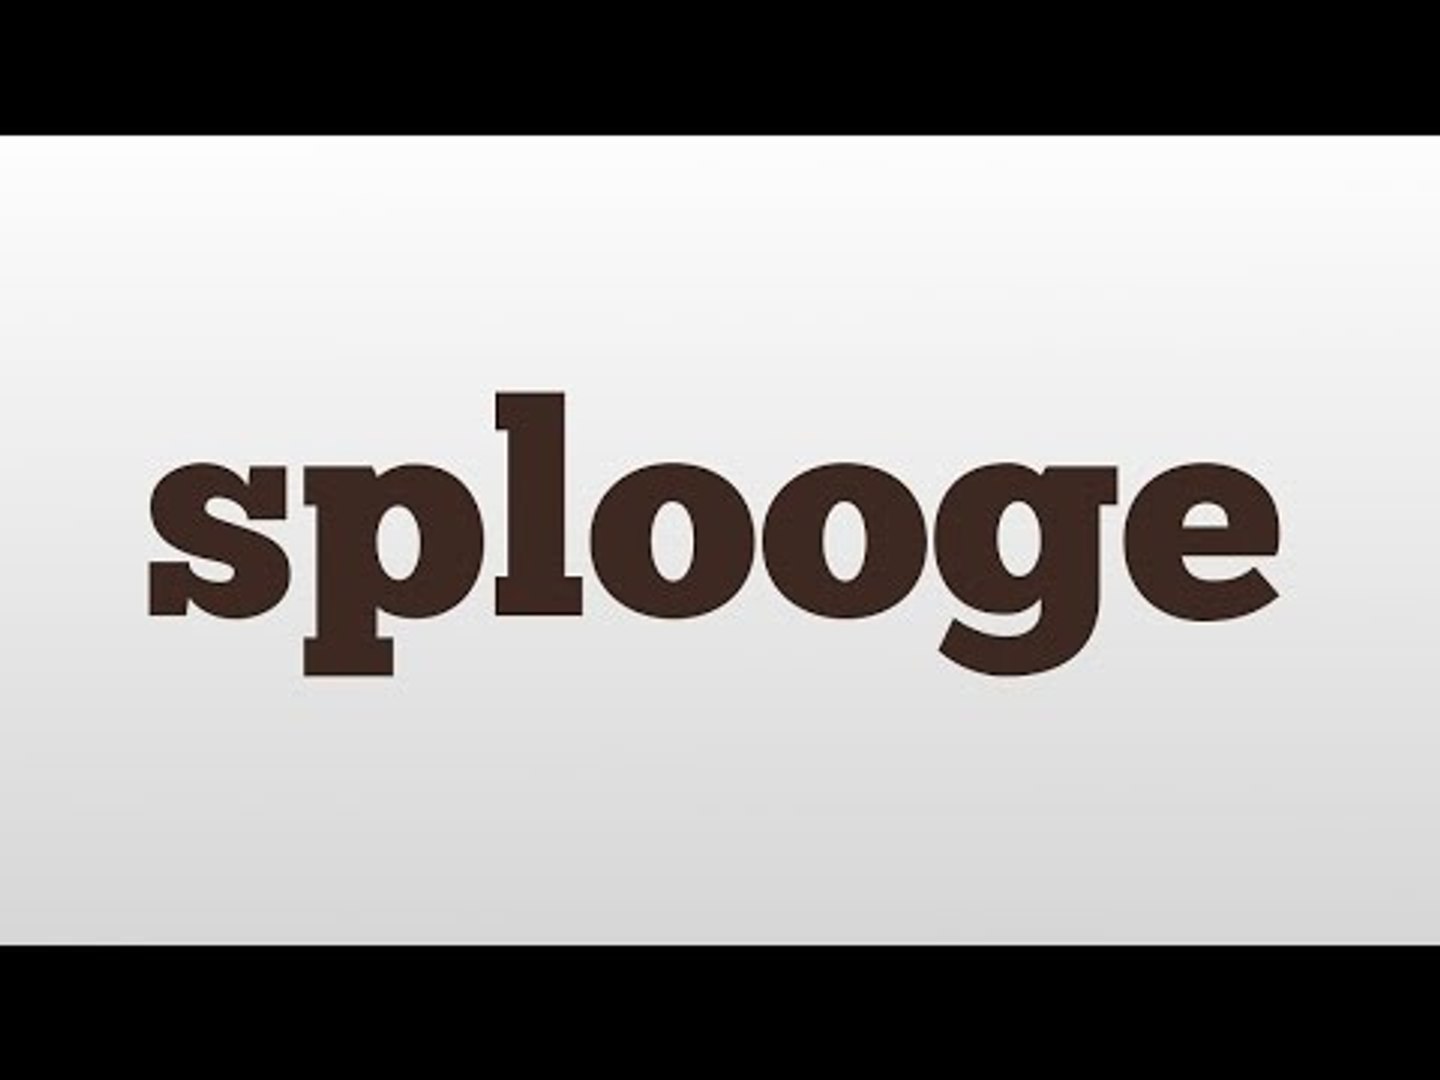 aaron rhames recommends What Does Splooge Mean